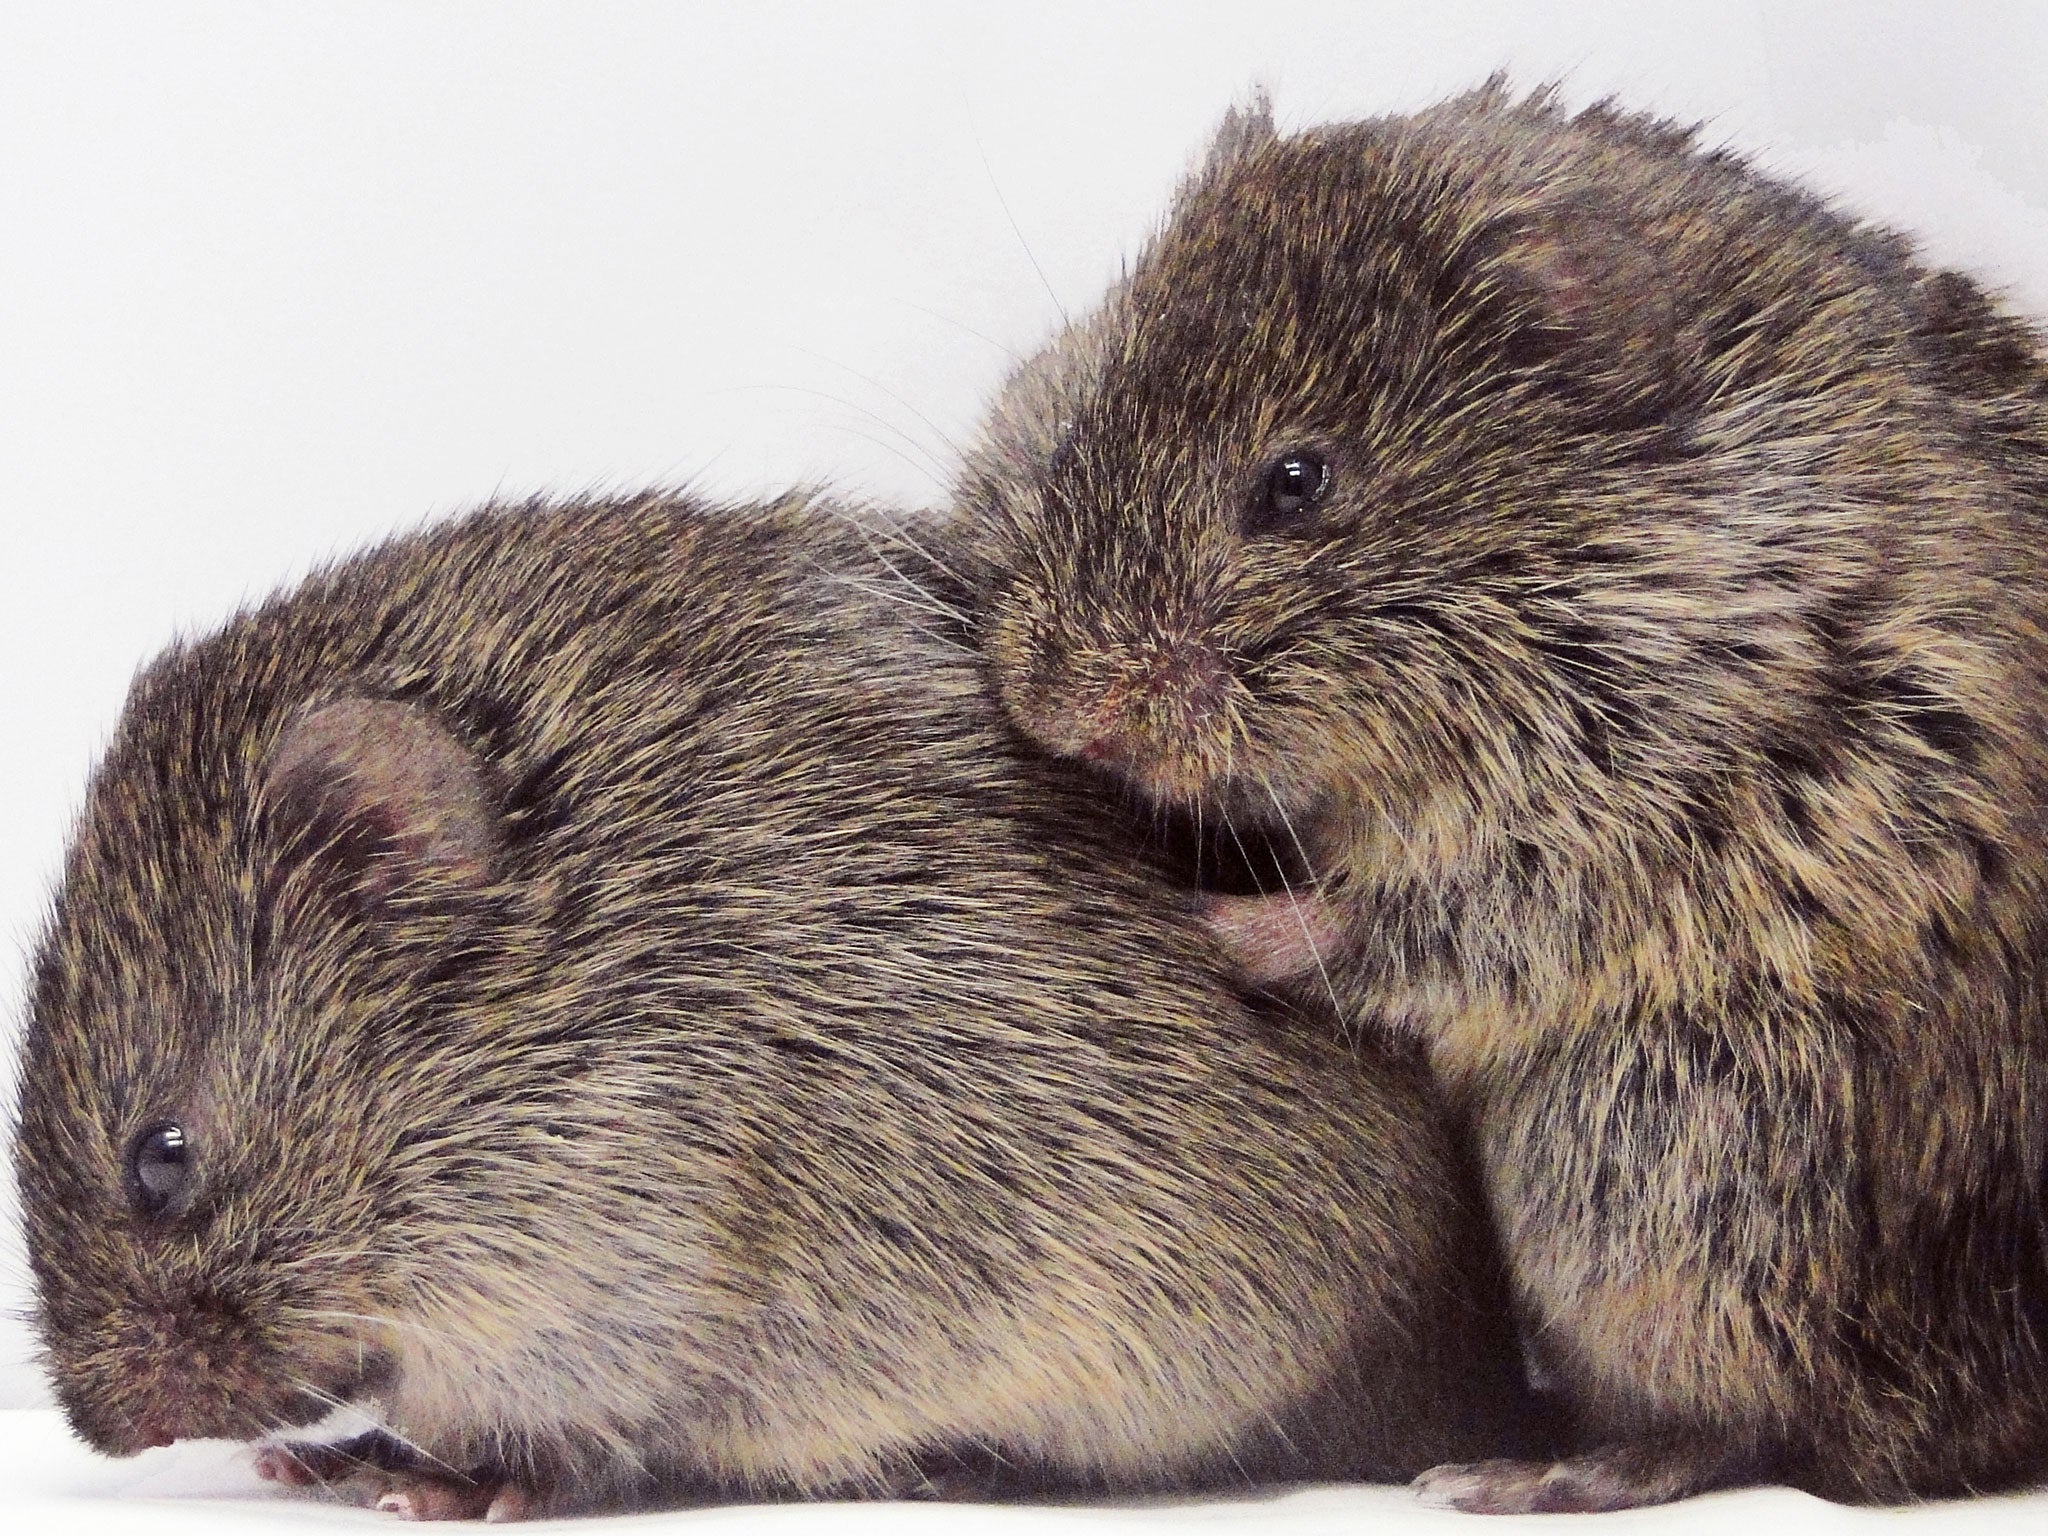 Vole models: mammals could shed light on the role of empathy in human mental health, a study says